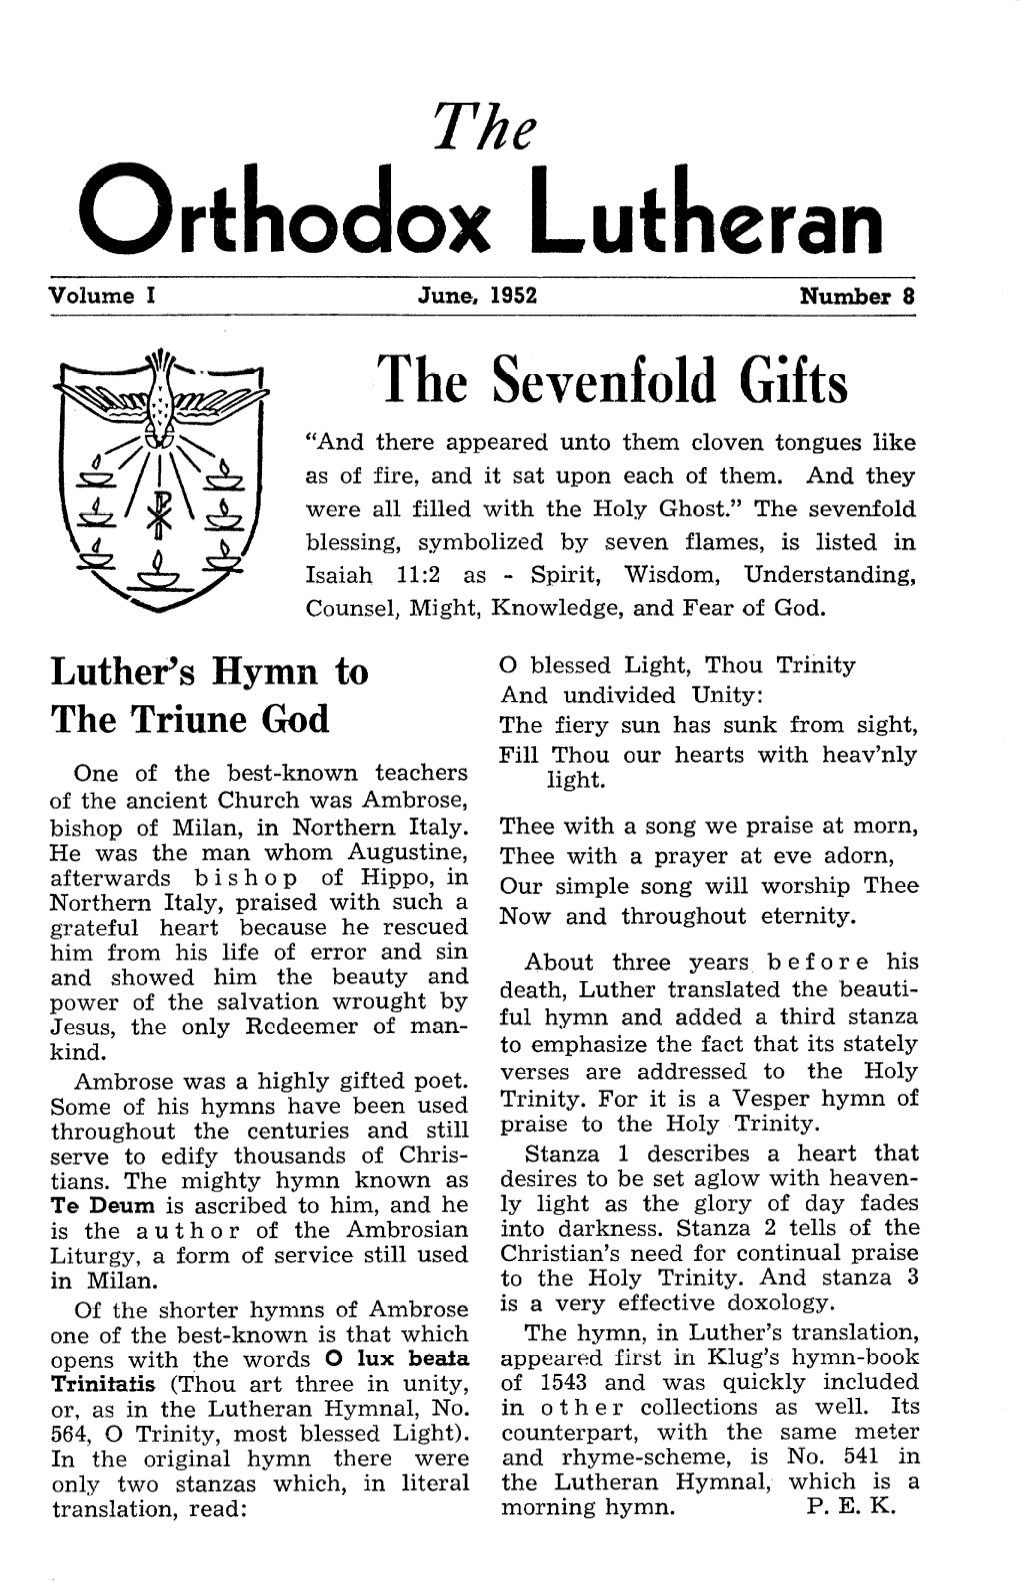 Orthodox Lutheran Volume I June, 1952 Number 8 the Sevenfold Gifts “And There Appeared Unto Them Cloven Tongues Like As of Fire, and It Sat Upon Each of Them